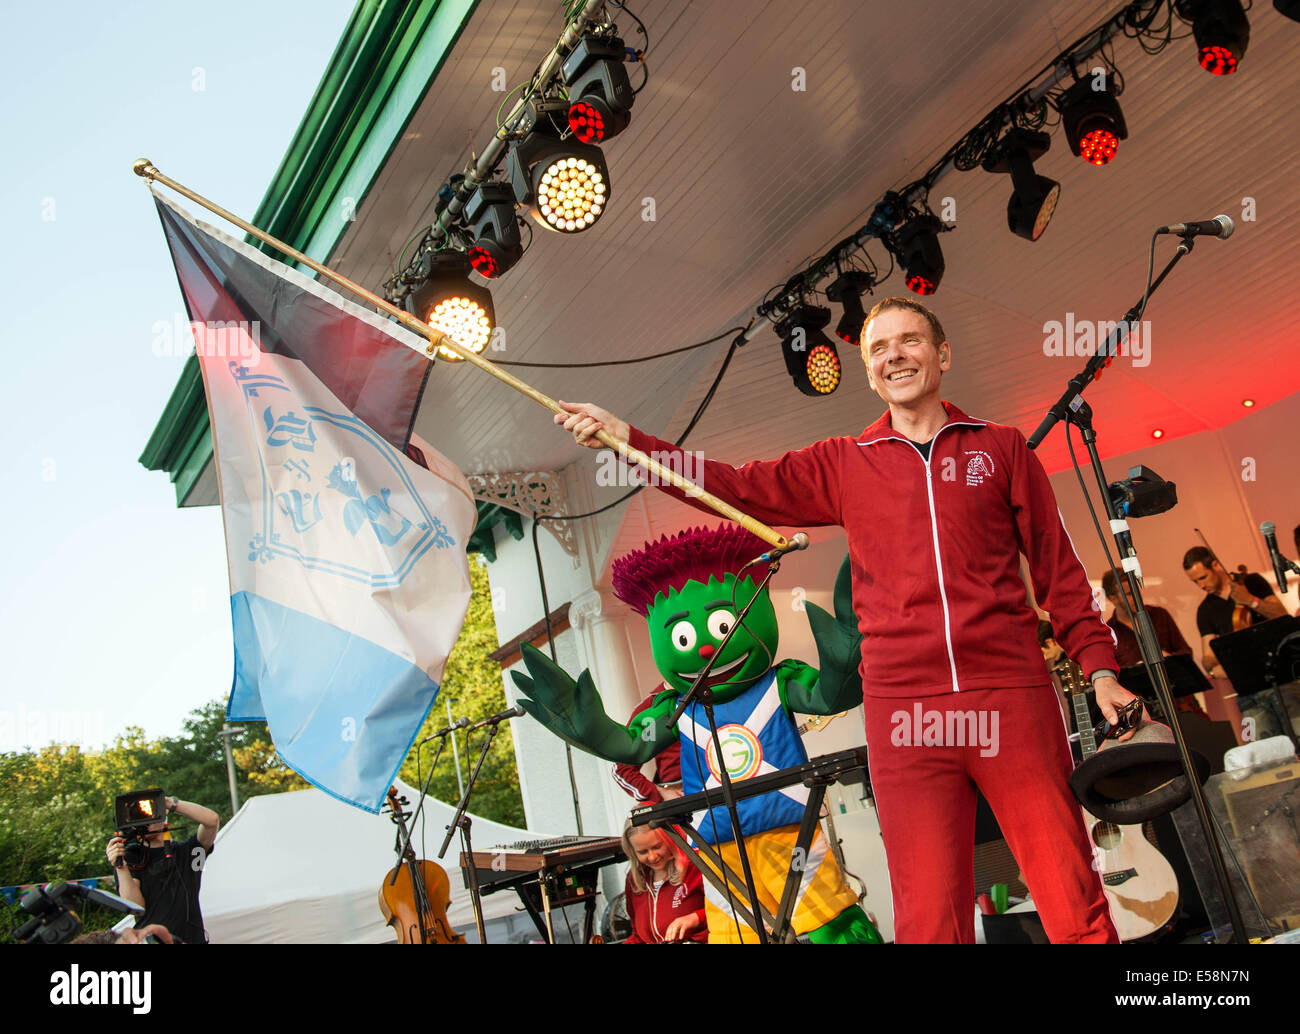 Glasgow, Scotland, UK. 23rd July, 2014. Stuart Murdoch of Belle and Sebastian performs at the kelvingrove bandstand as part of opening celebrations of the Glasgow Commonwealth Games 2014. Glasgow Scotland July 23rd. Credit:  Sam Kovak/Alamy Live News Stock Photo